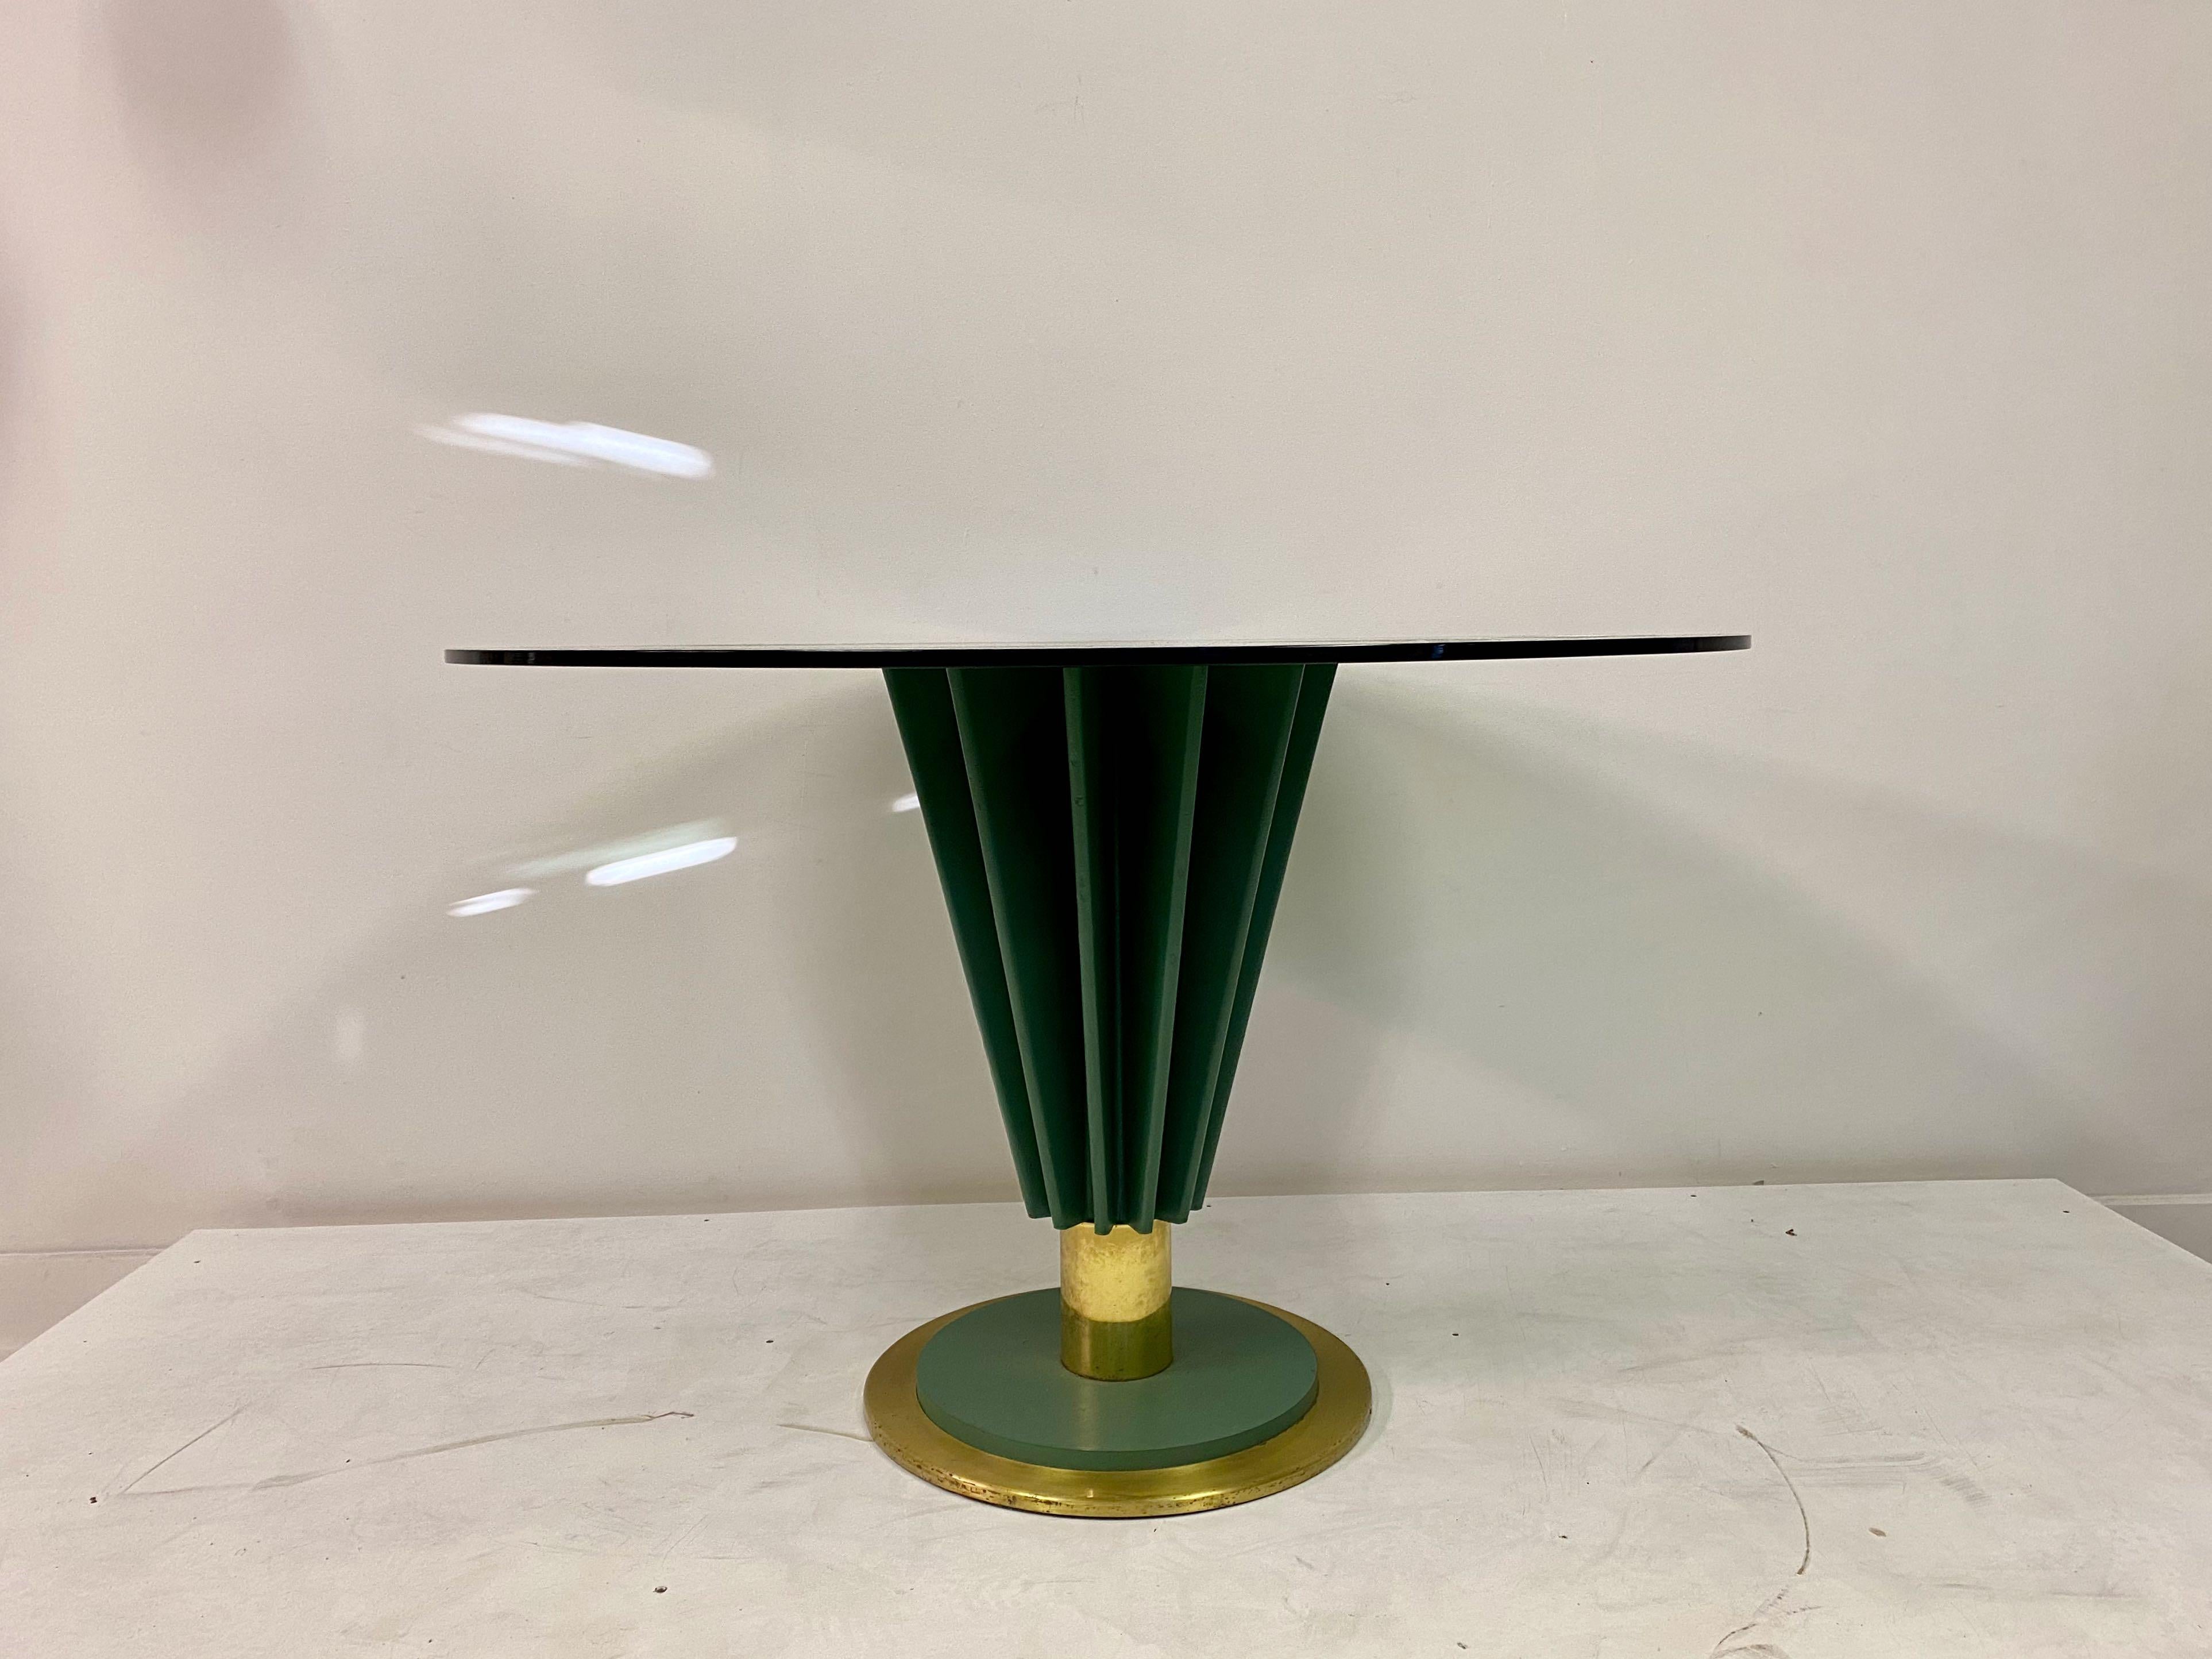 Dining table

By Pierre Cardin

One green pedestal

Round smoked glass top

Iron and brass base

Signed

1970s Italian

Glass size and color can be changed on request

Two available.